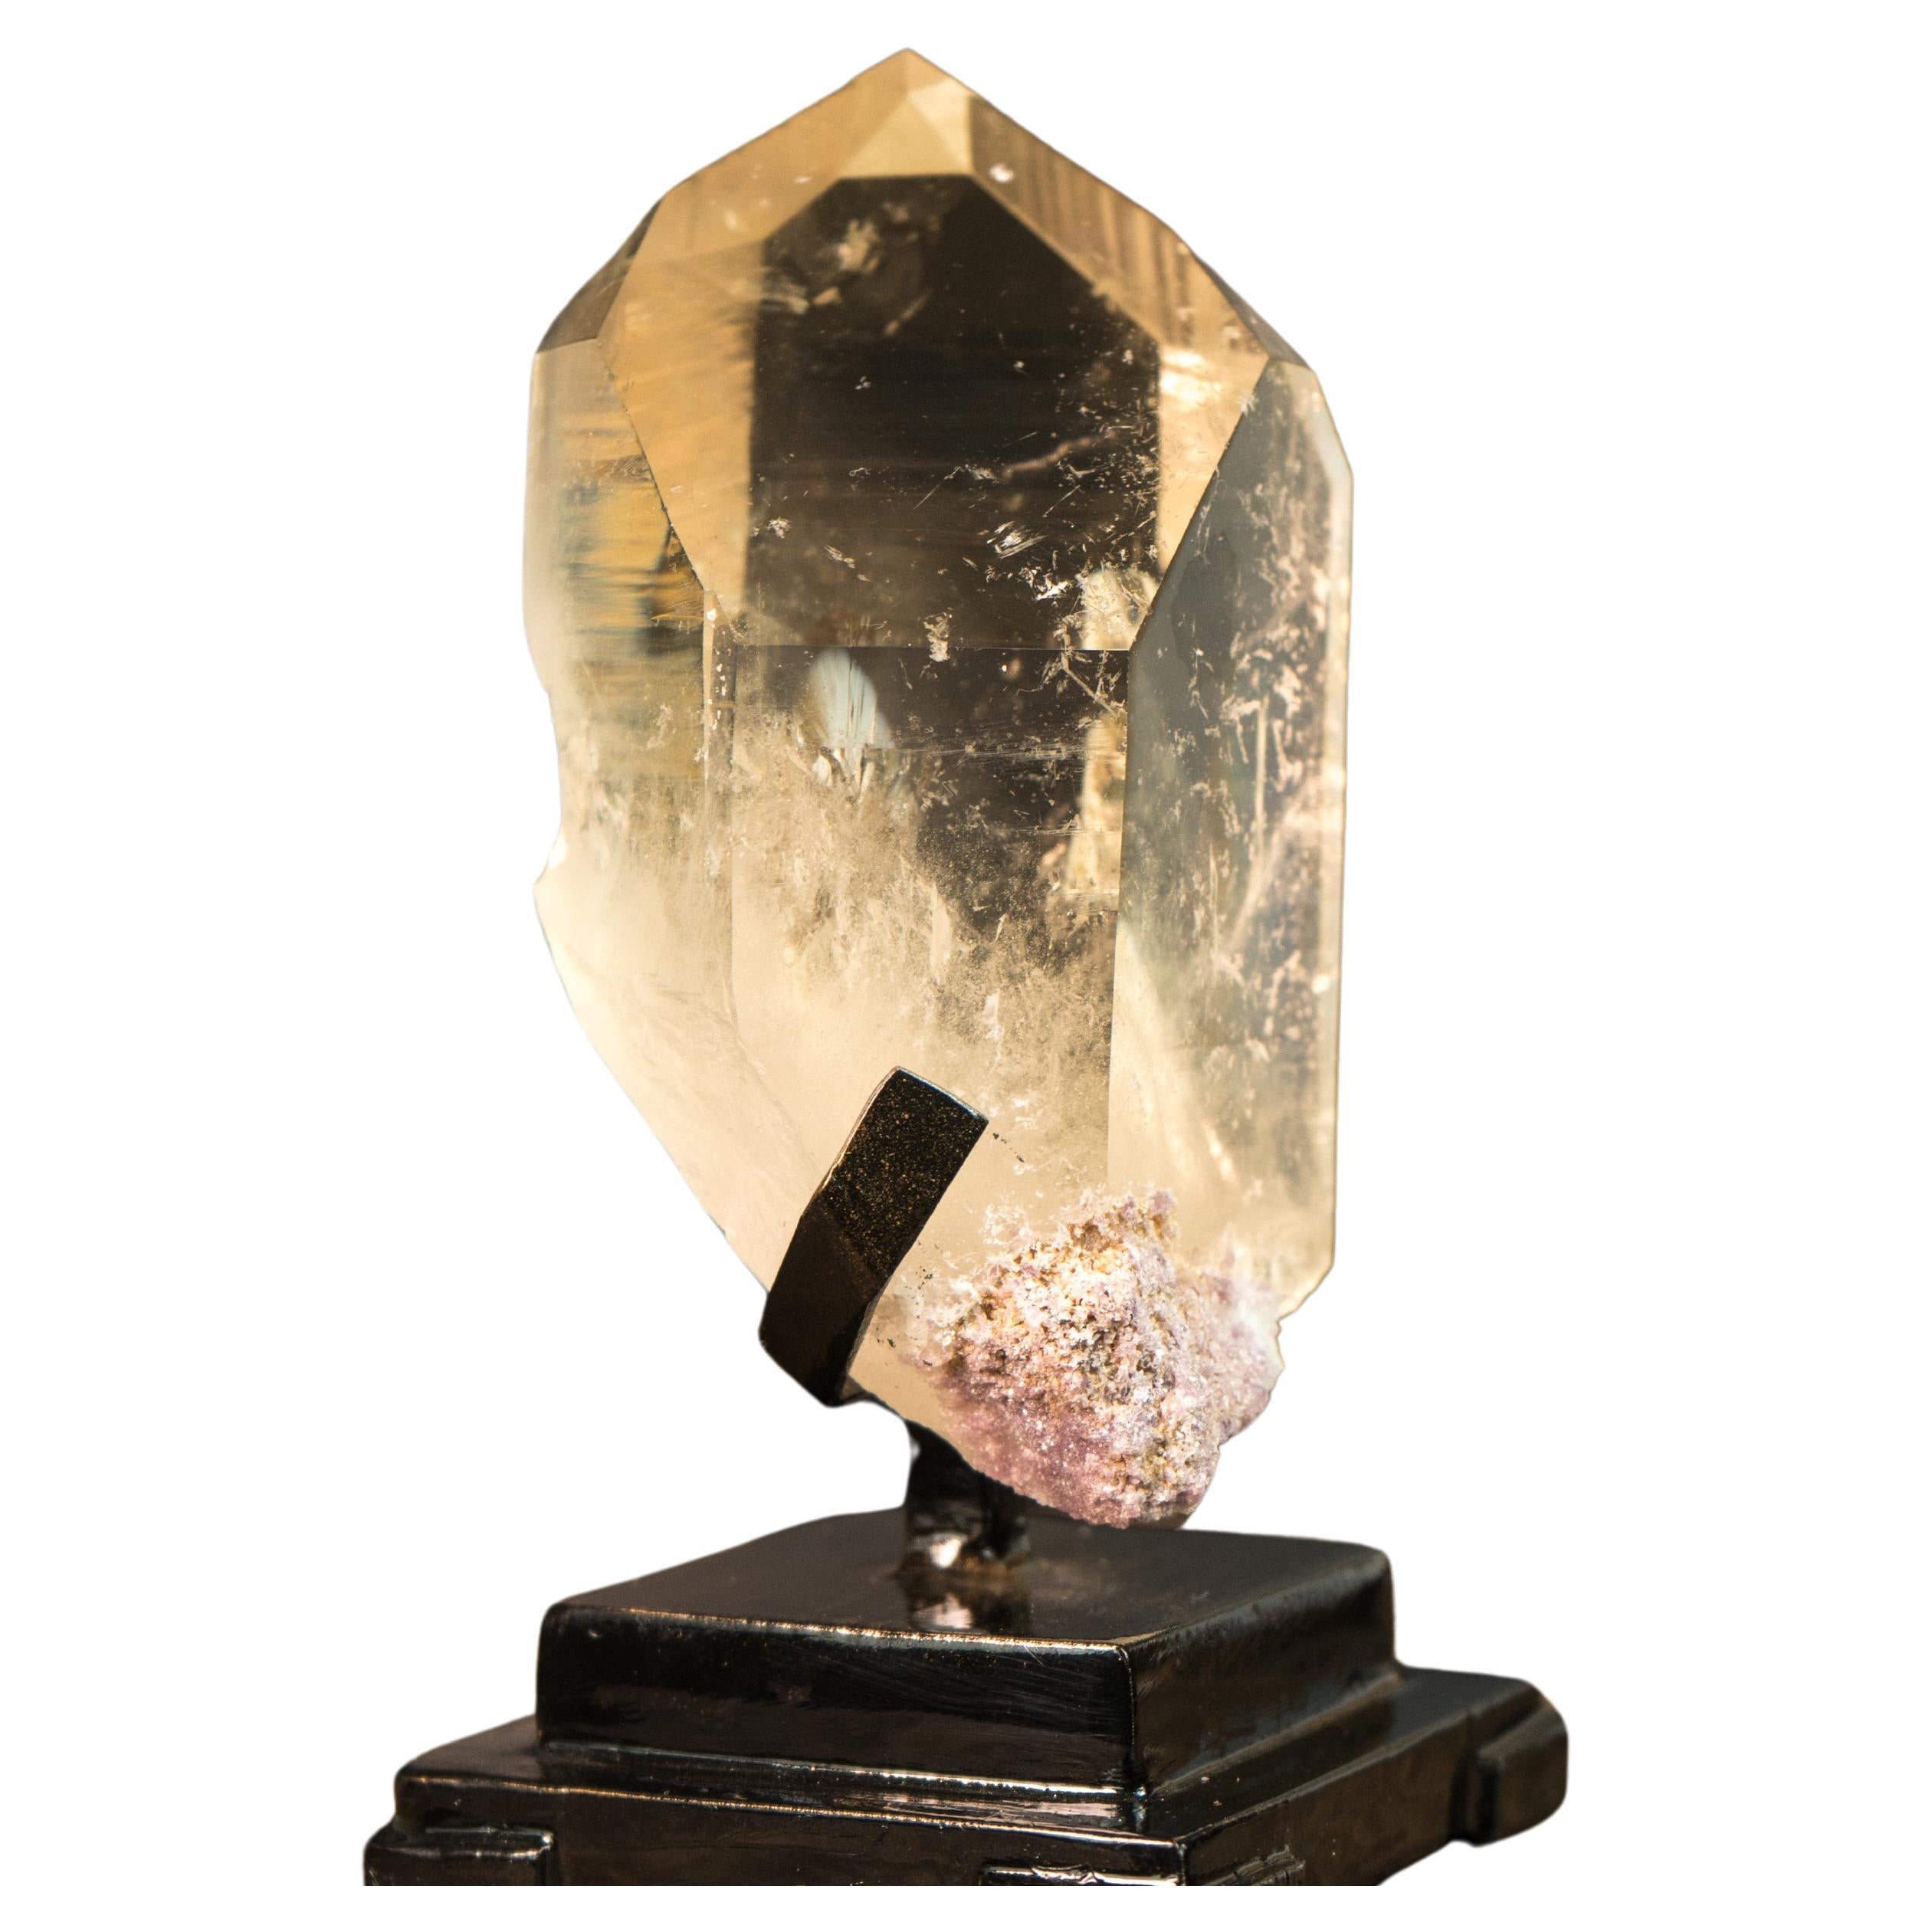 AAA Real Raw Light-Yellow Citrine on Stand: Lemurian Seed Citrine with Water Clear Quartz and World Class Aesthetics

▫️ Description

Spectacular in many ways, this real, raw natural Citrine tower with Lemurian lines is the cream of the crop in